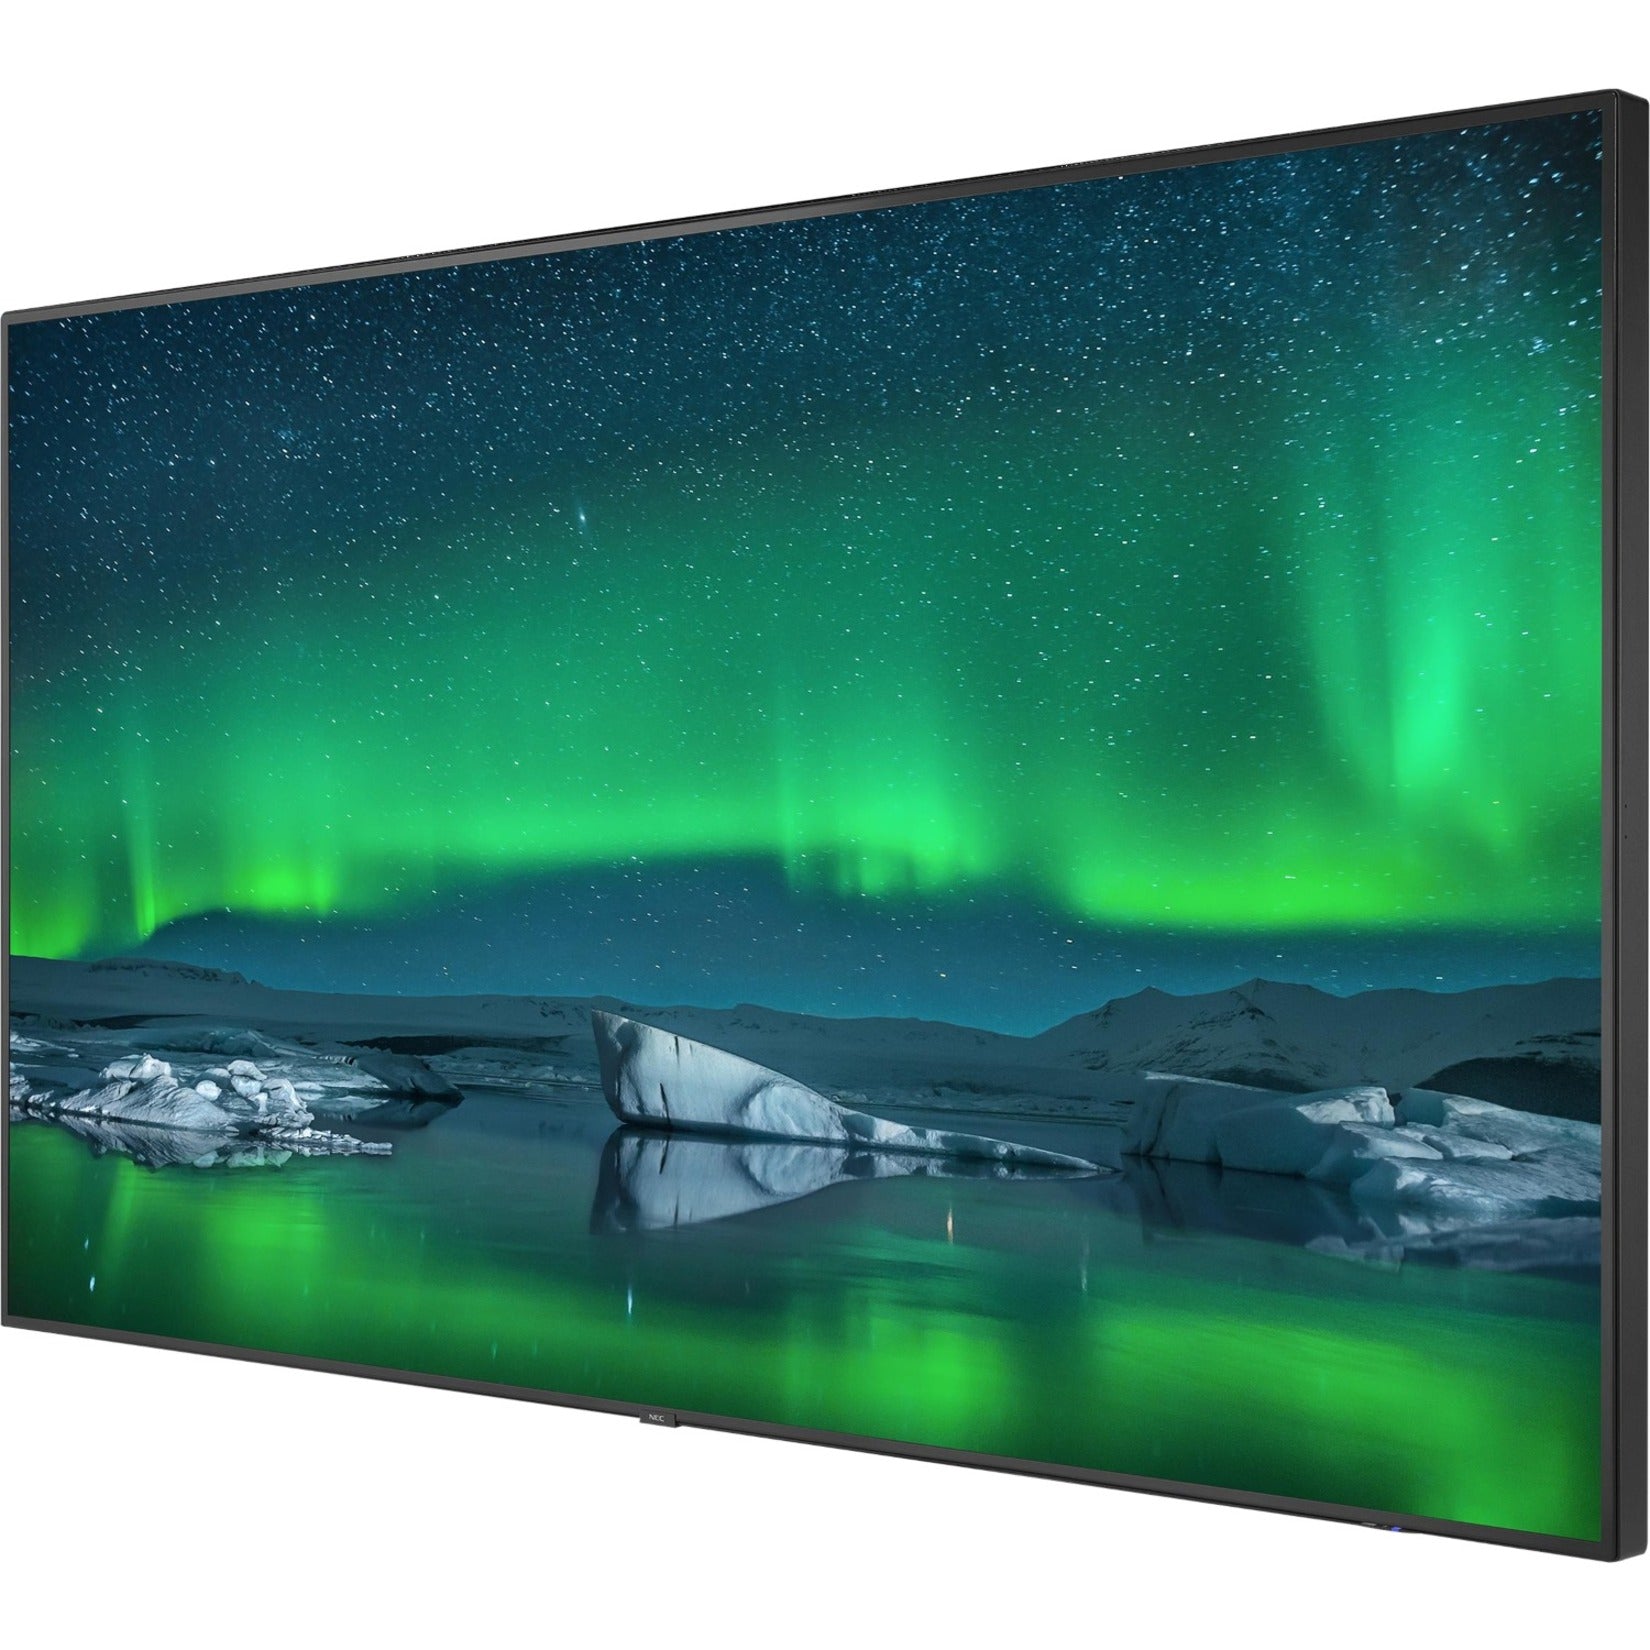 NEC Display C861Q 86" Ultra High Definition Commercial Display, 350 Nit, 2160p, 3 Year Warranty